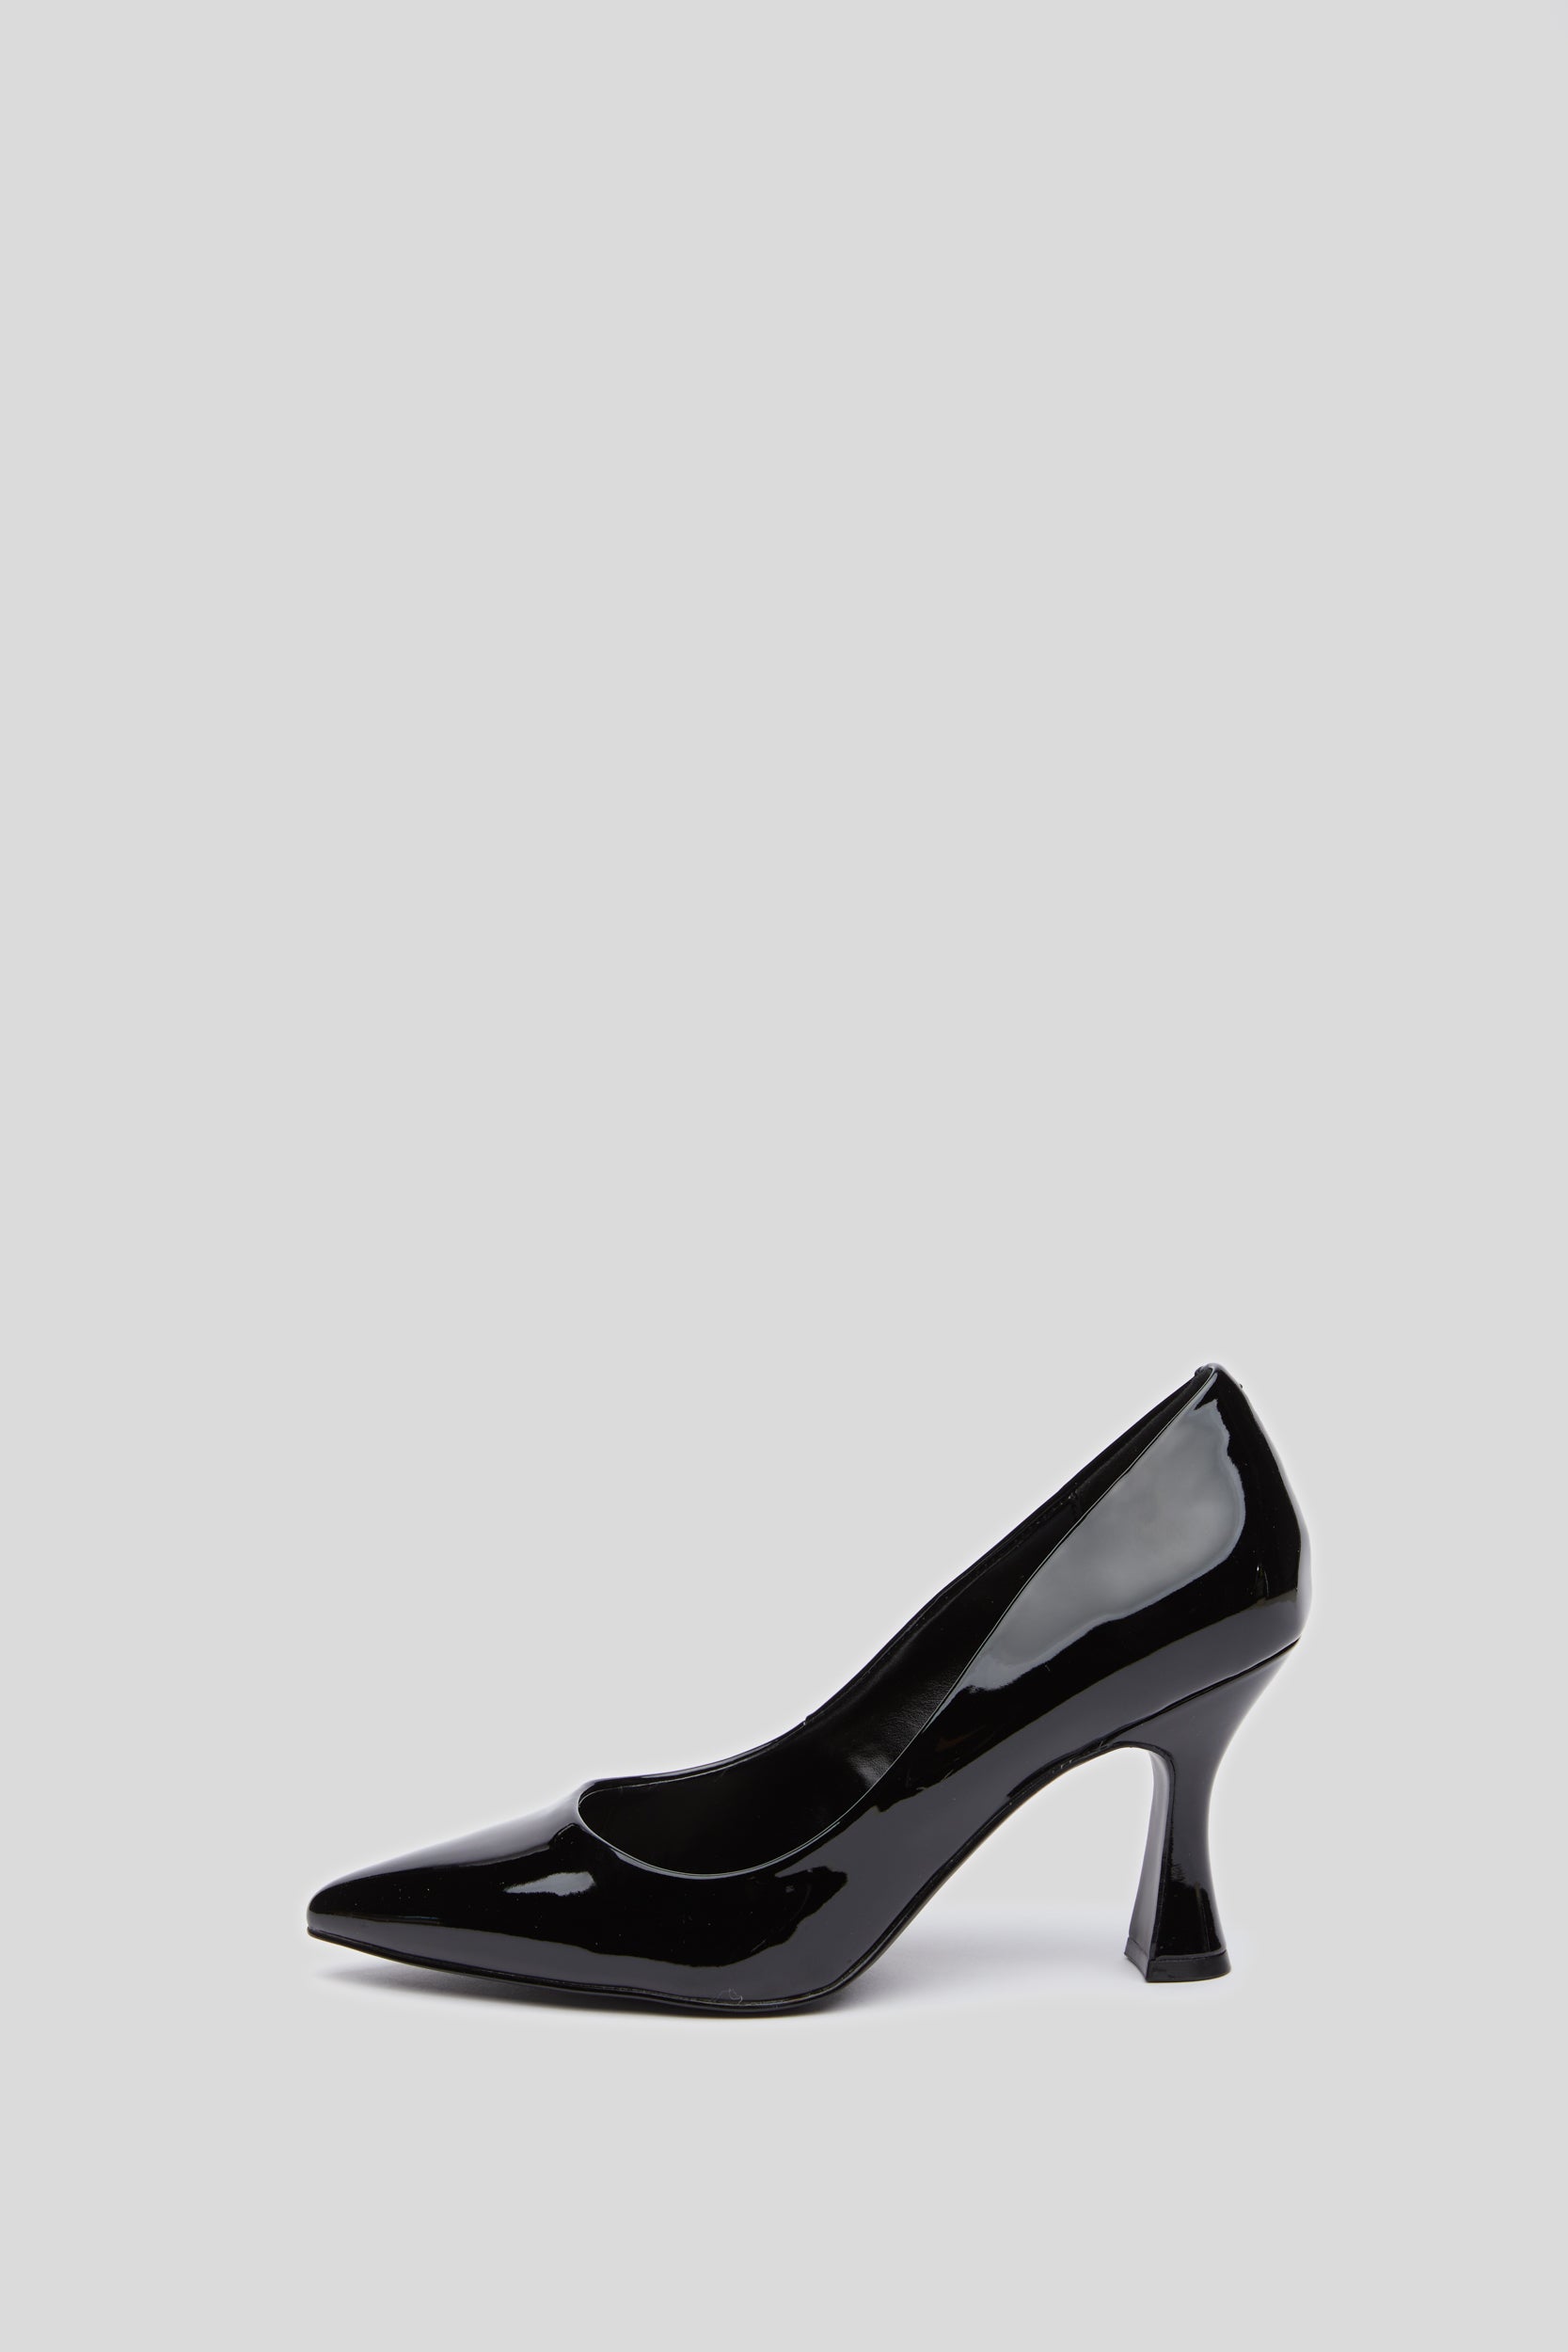 STEVE MADDEN "Notary" Pumps in Black Patent Leather